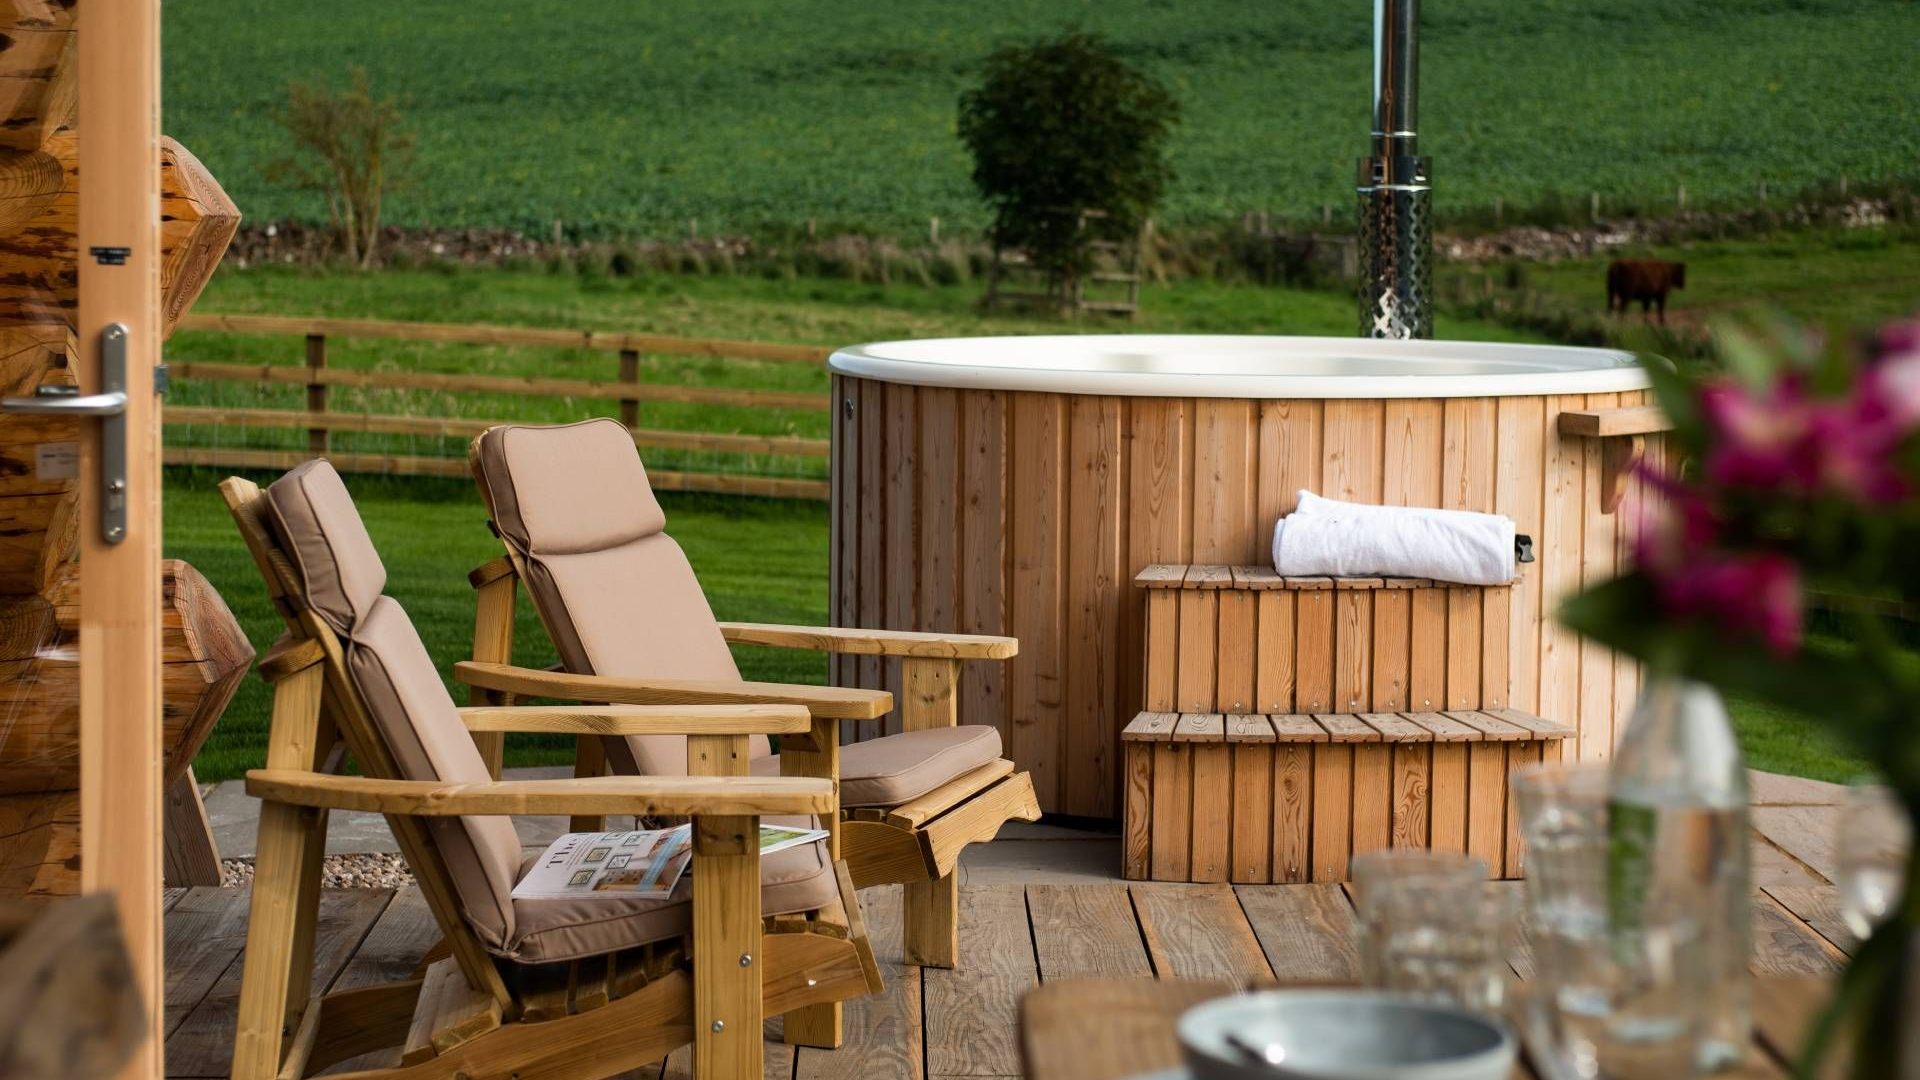 Hot tub and deck chairs overlooking the countryside